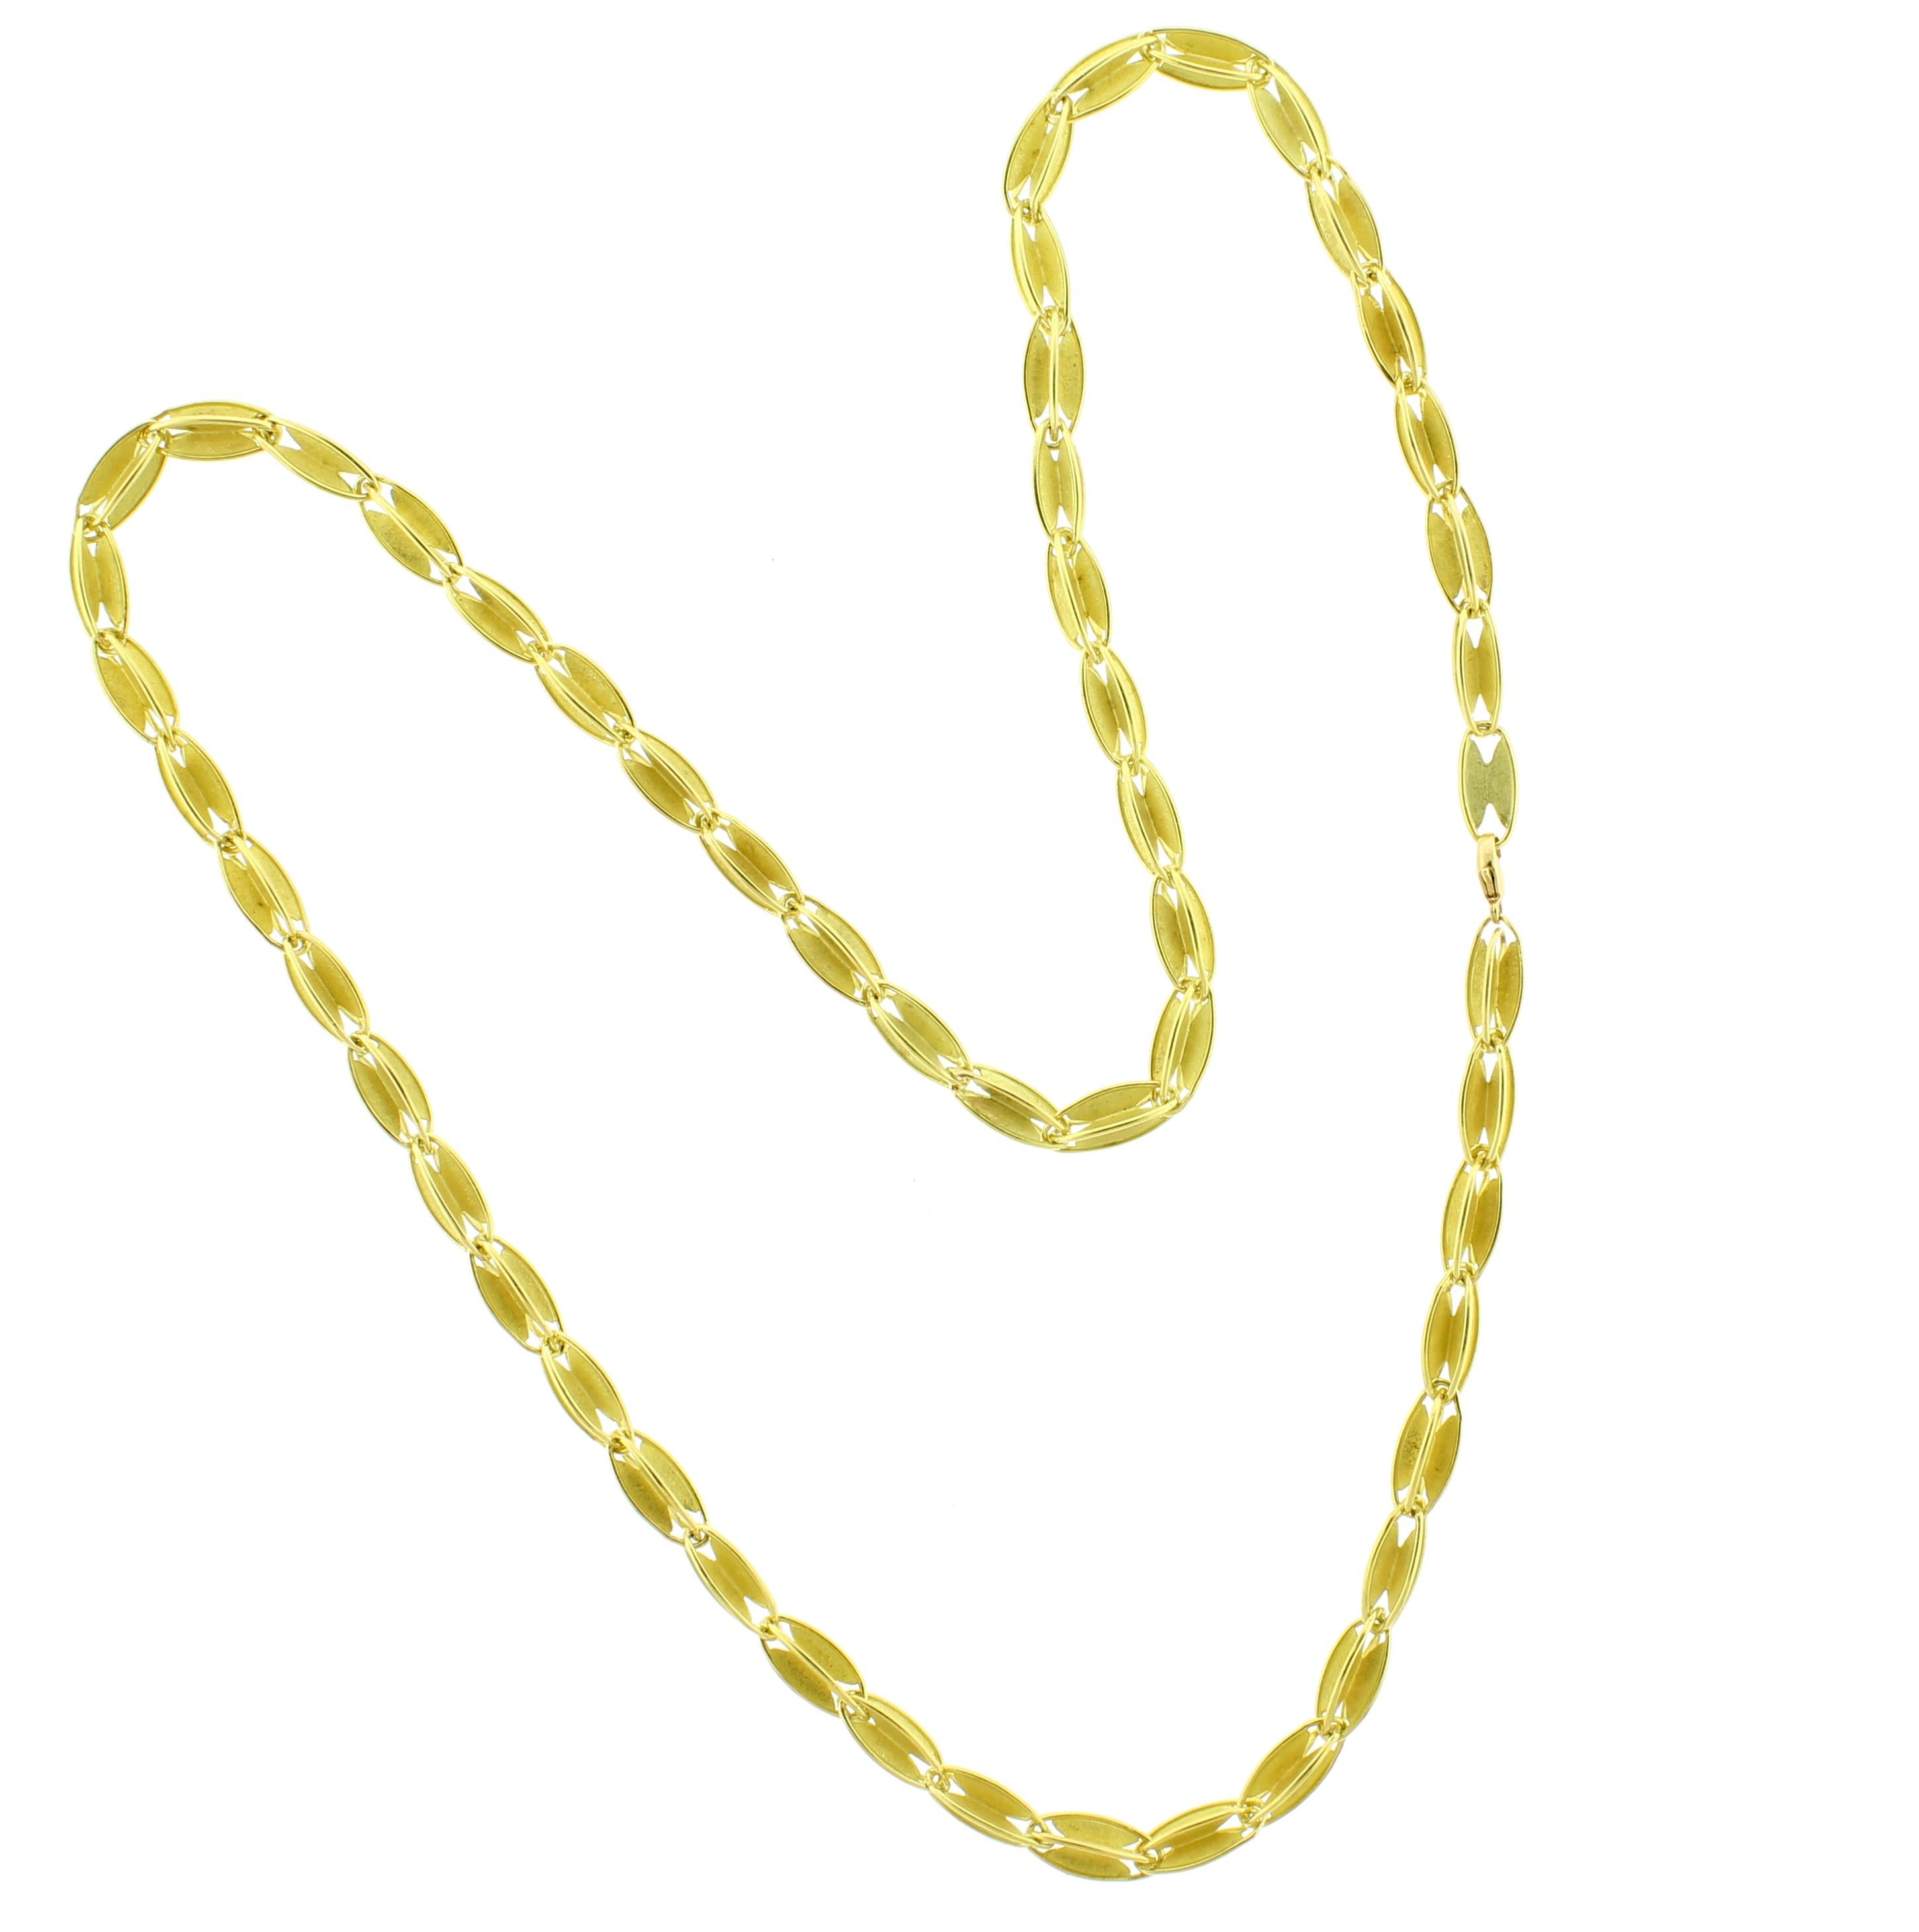 From the studios of classically trained goldsmith; Barbara Heinrich, a beautifully textured 18 karat gold necklace. The necklace features gold oval shaped links with highly polished edges measuring 24 inches and weighing 43.2 grams. Current retail